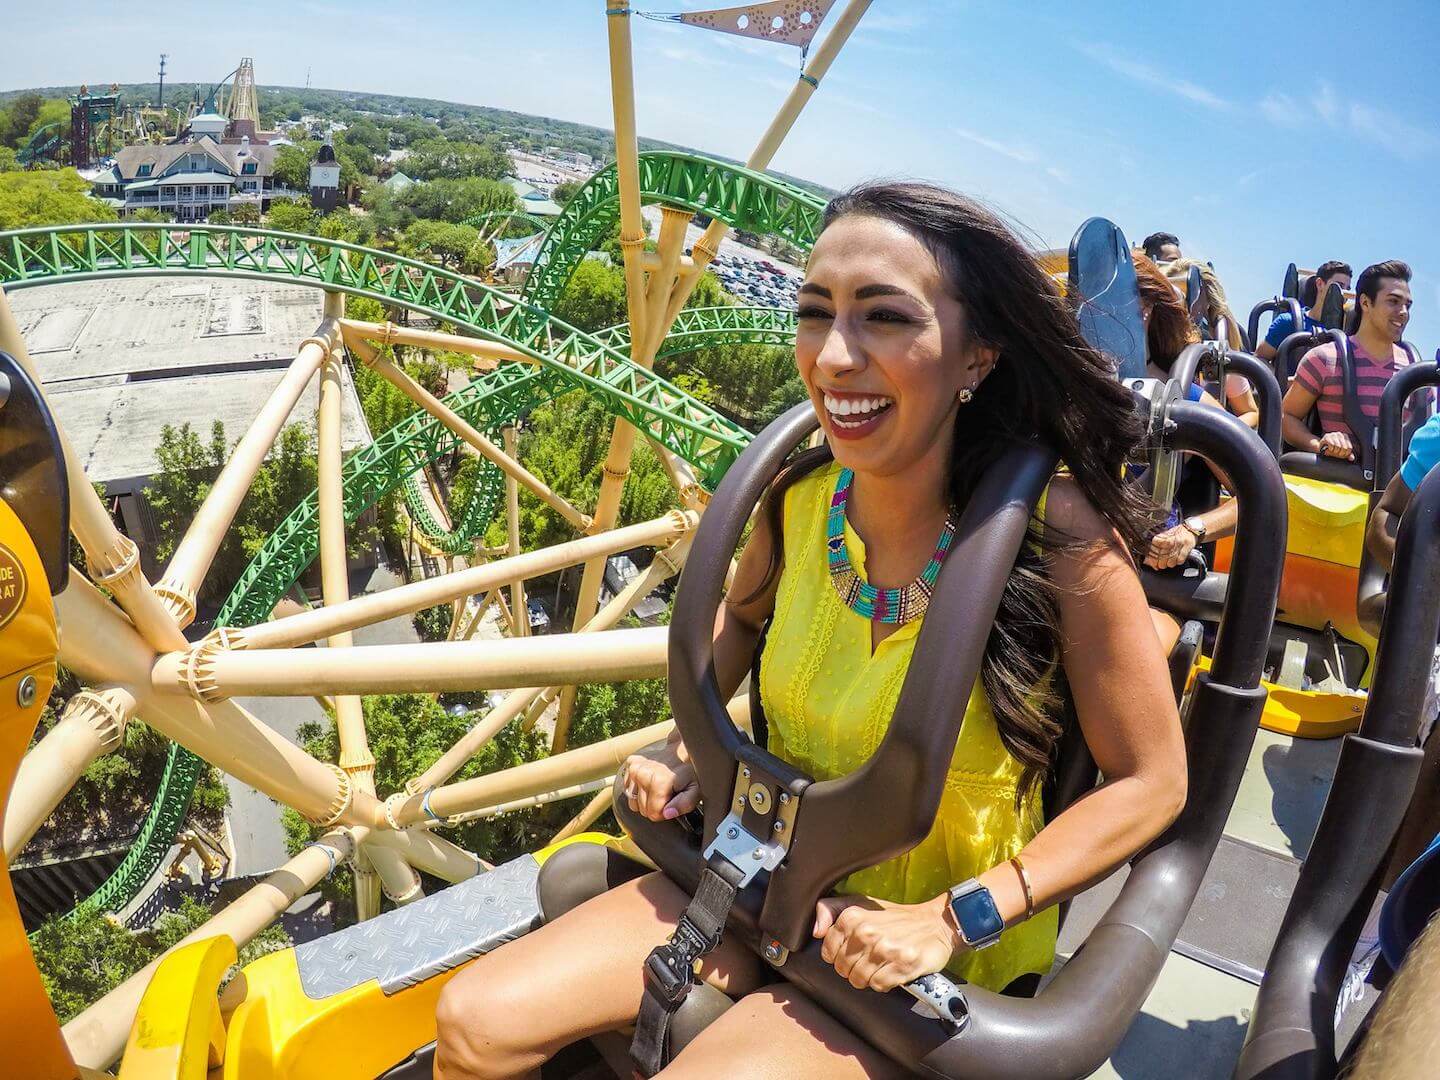 Exciting rollercoaster rides Busch Gardens Tampa Bay. Must Do Visitor Guides, MustDo.com